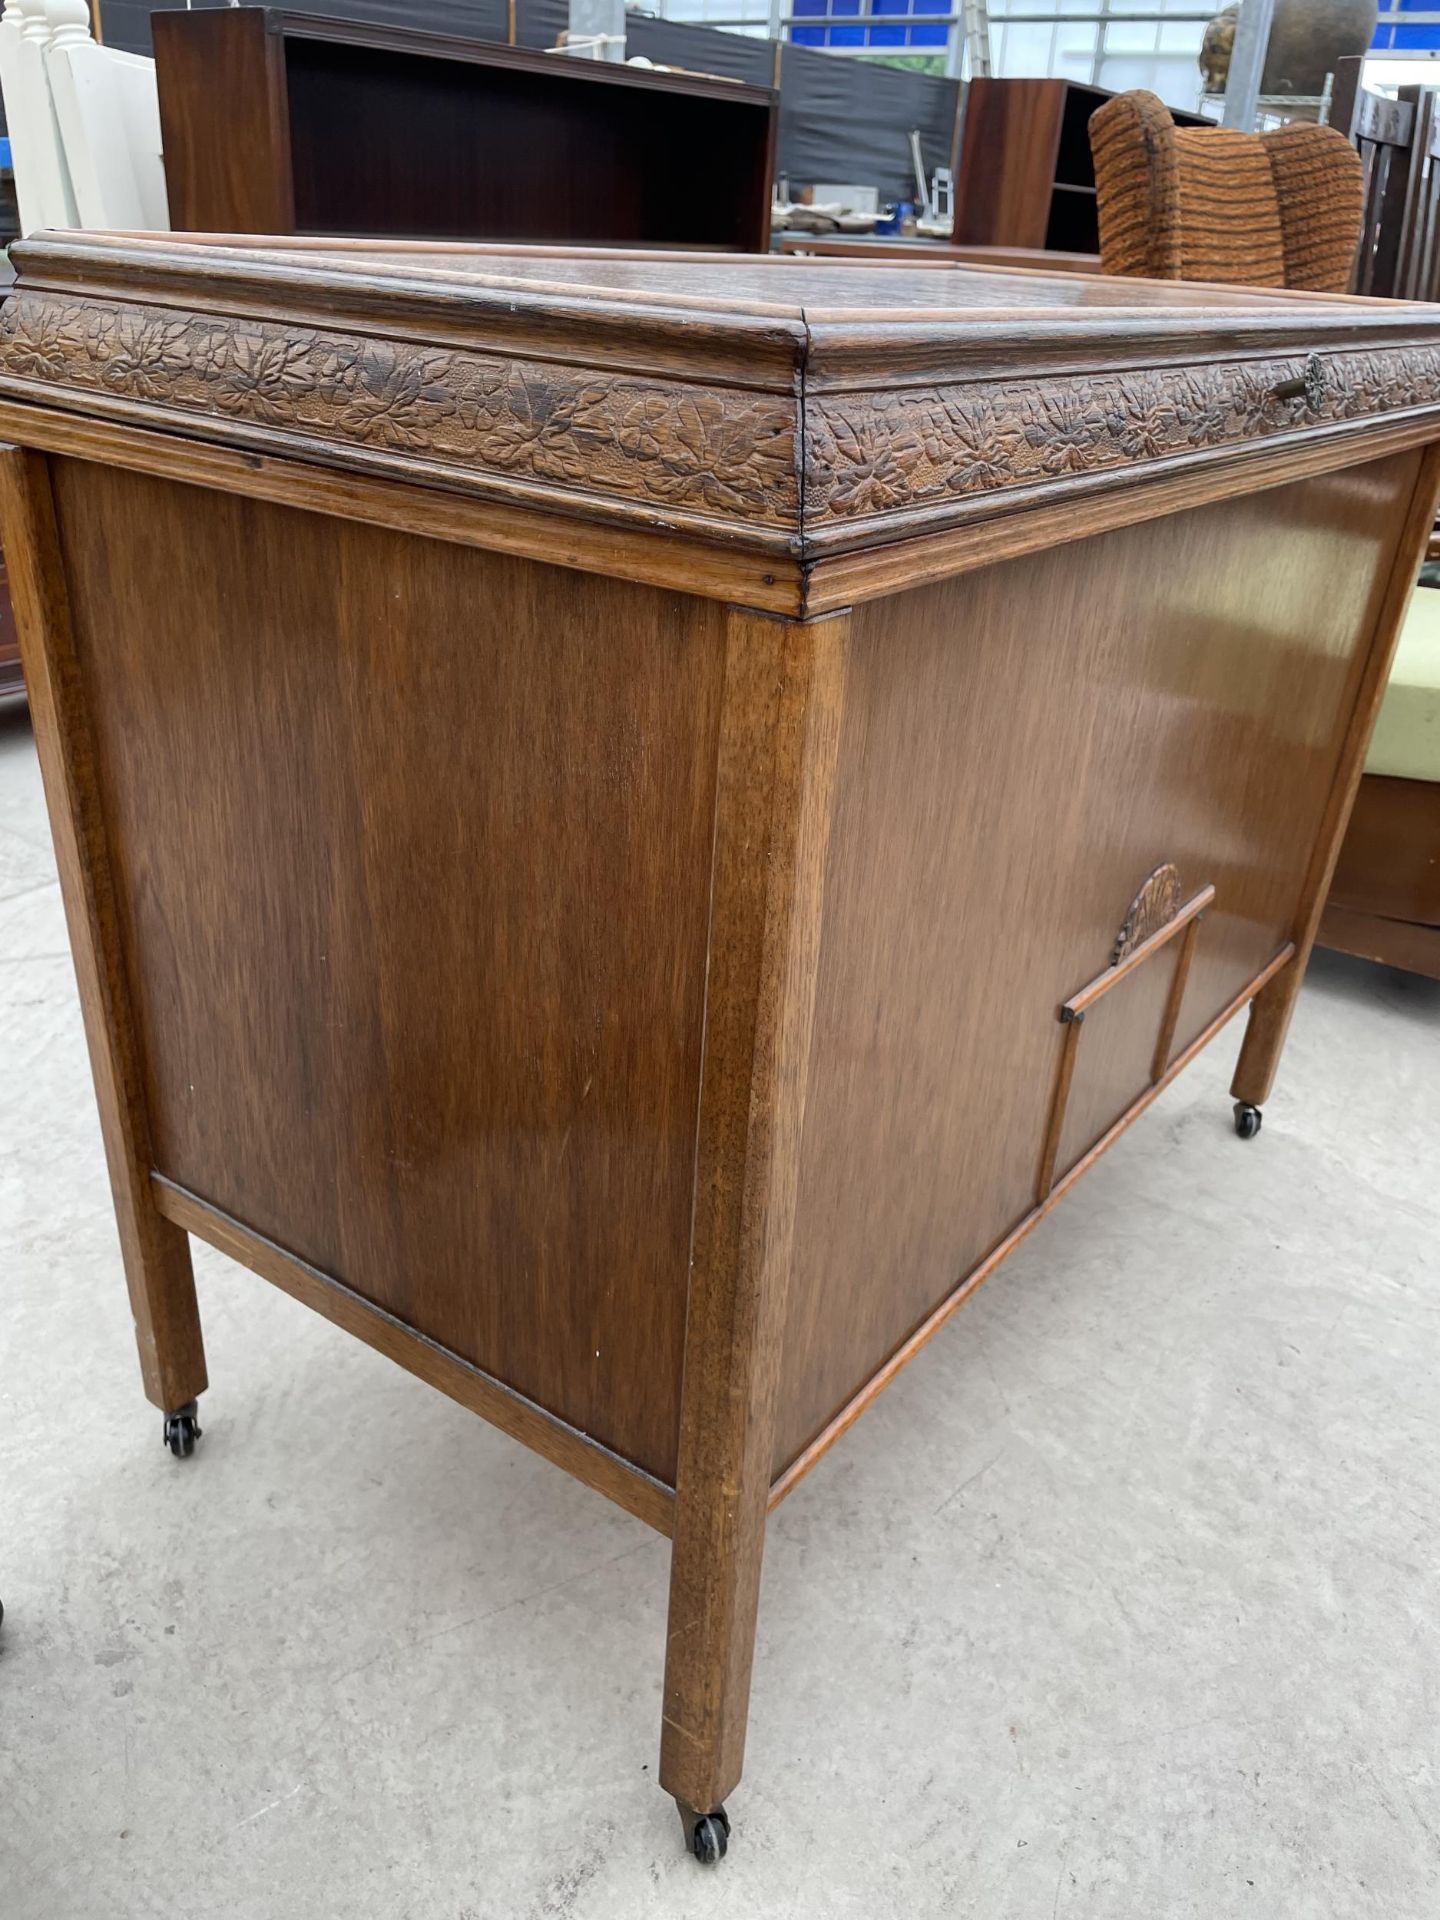 A MID 20TH CENTURY OAK BLANKET CHEST - Image 3 of 3